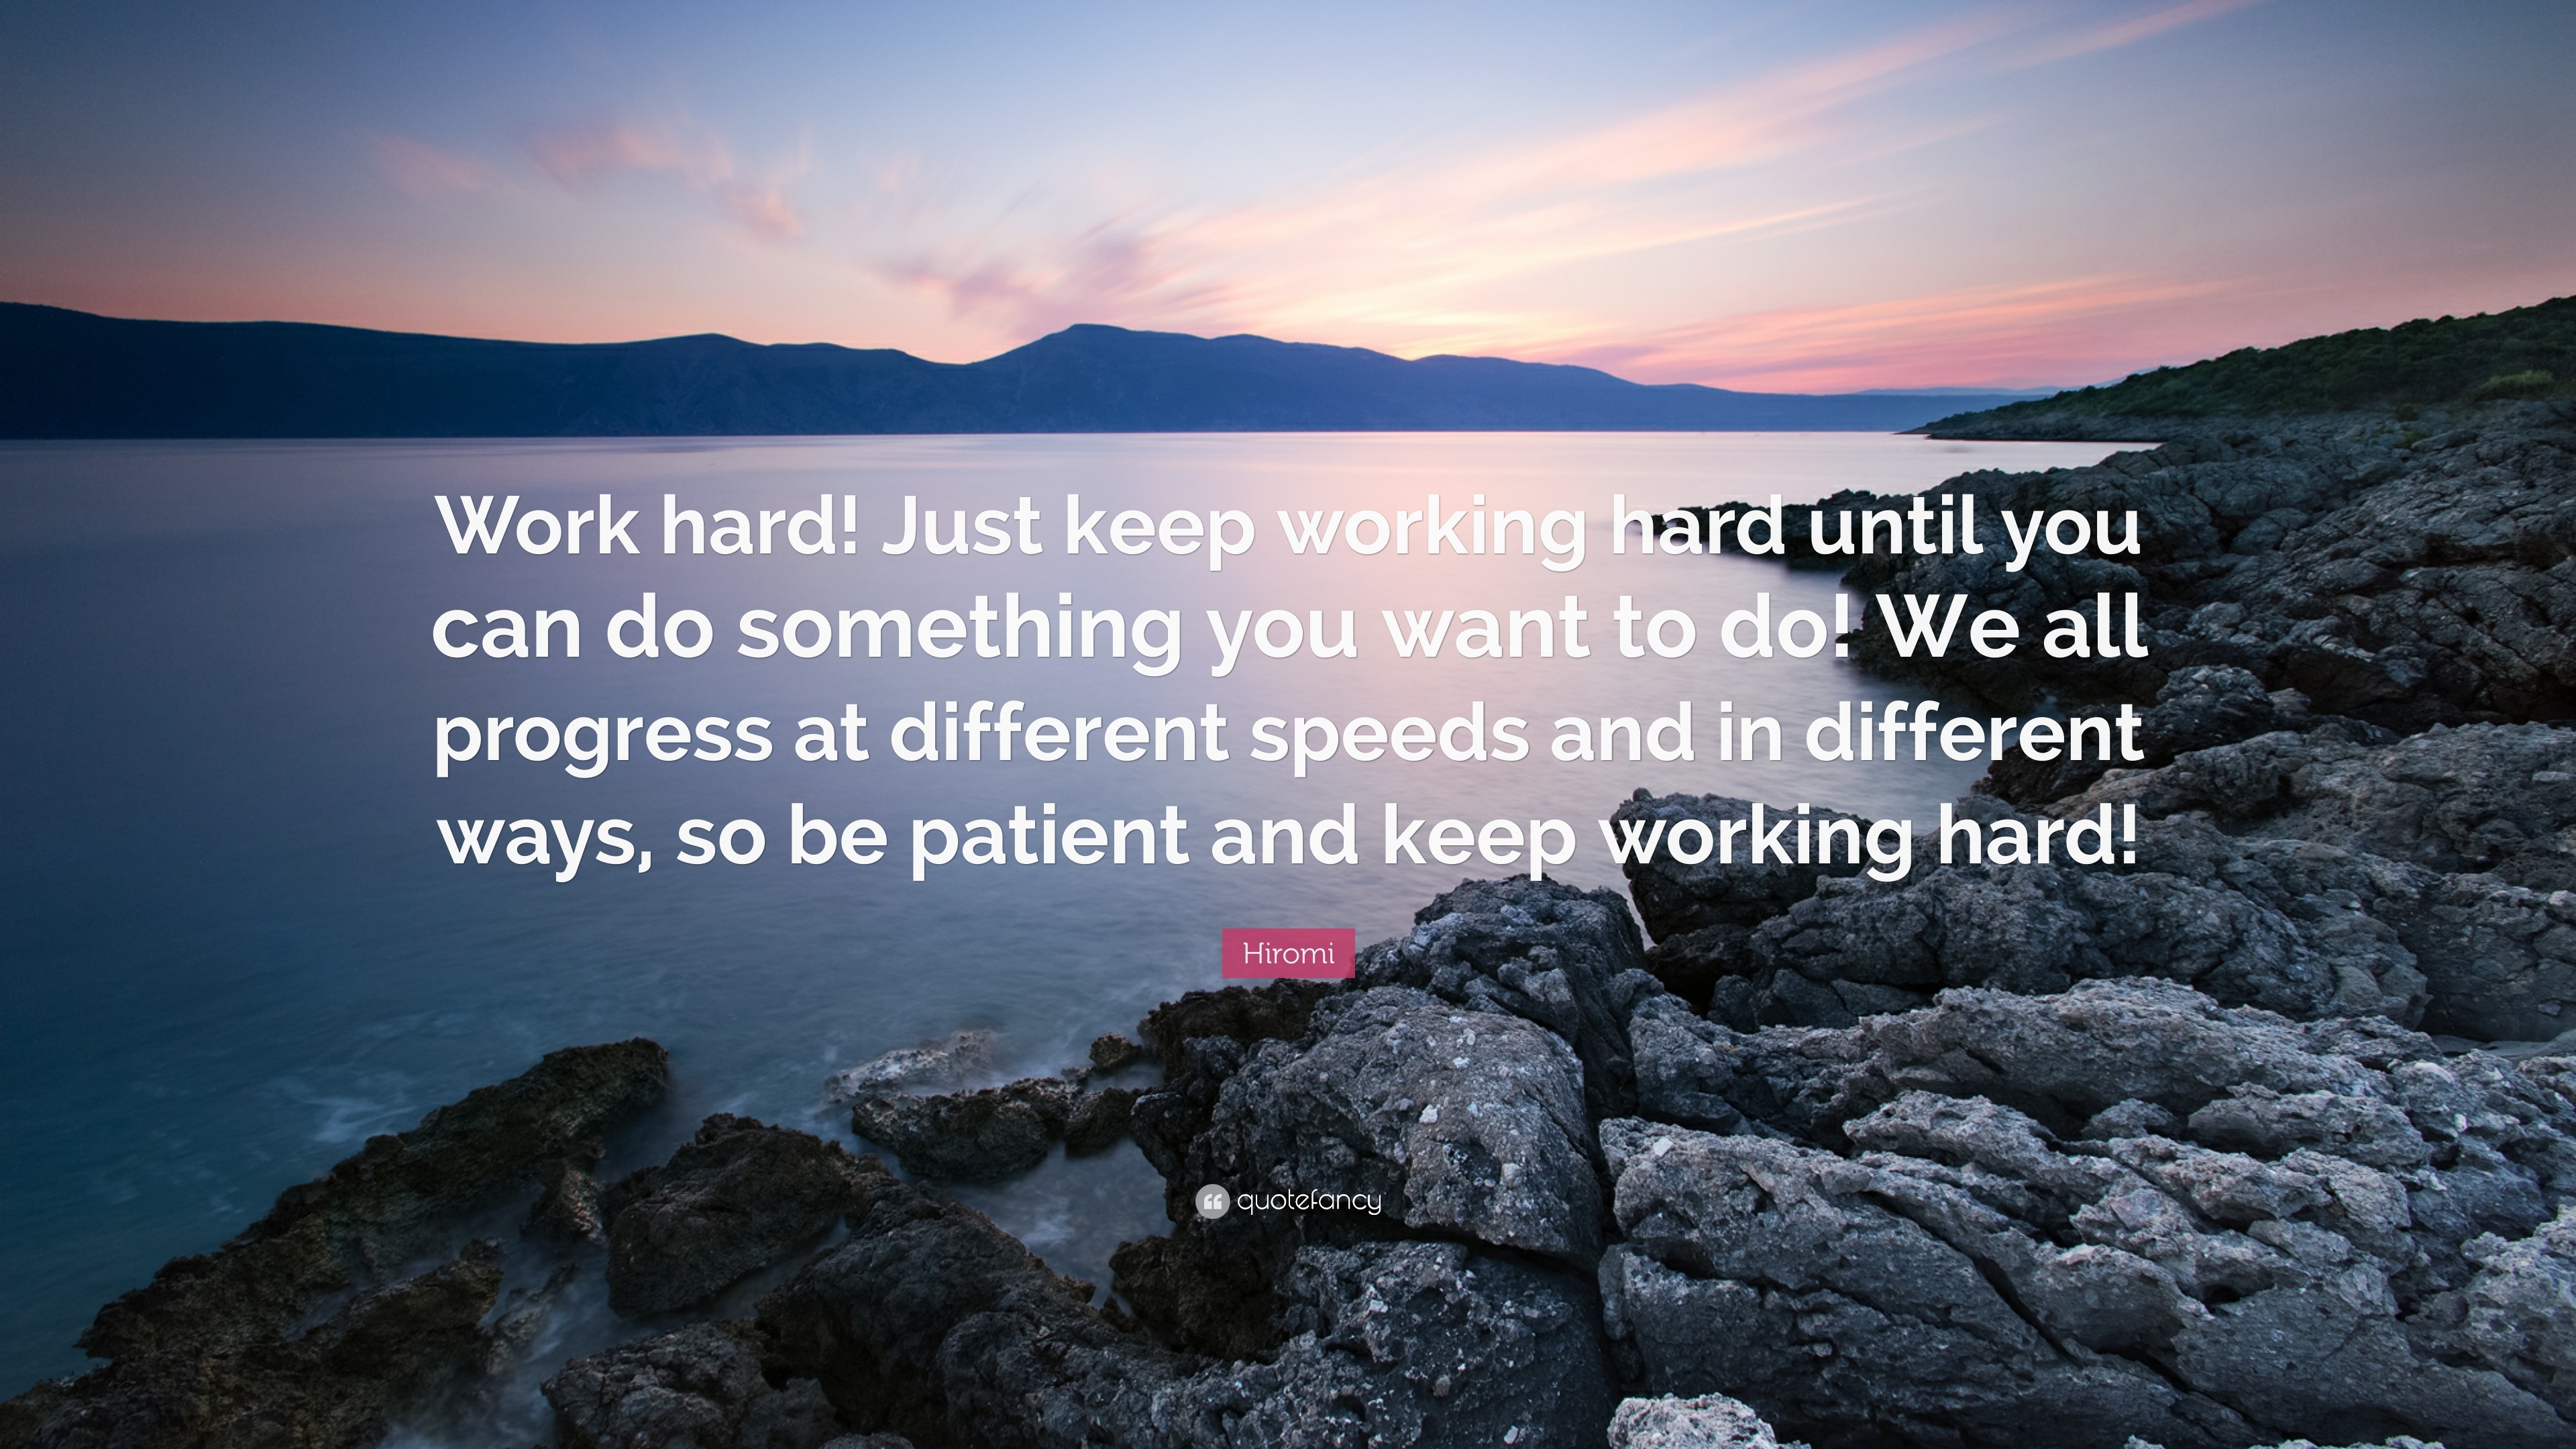 Just Keep Working Hard Quotes - When things get hard, just keep walking ...